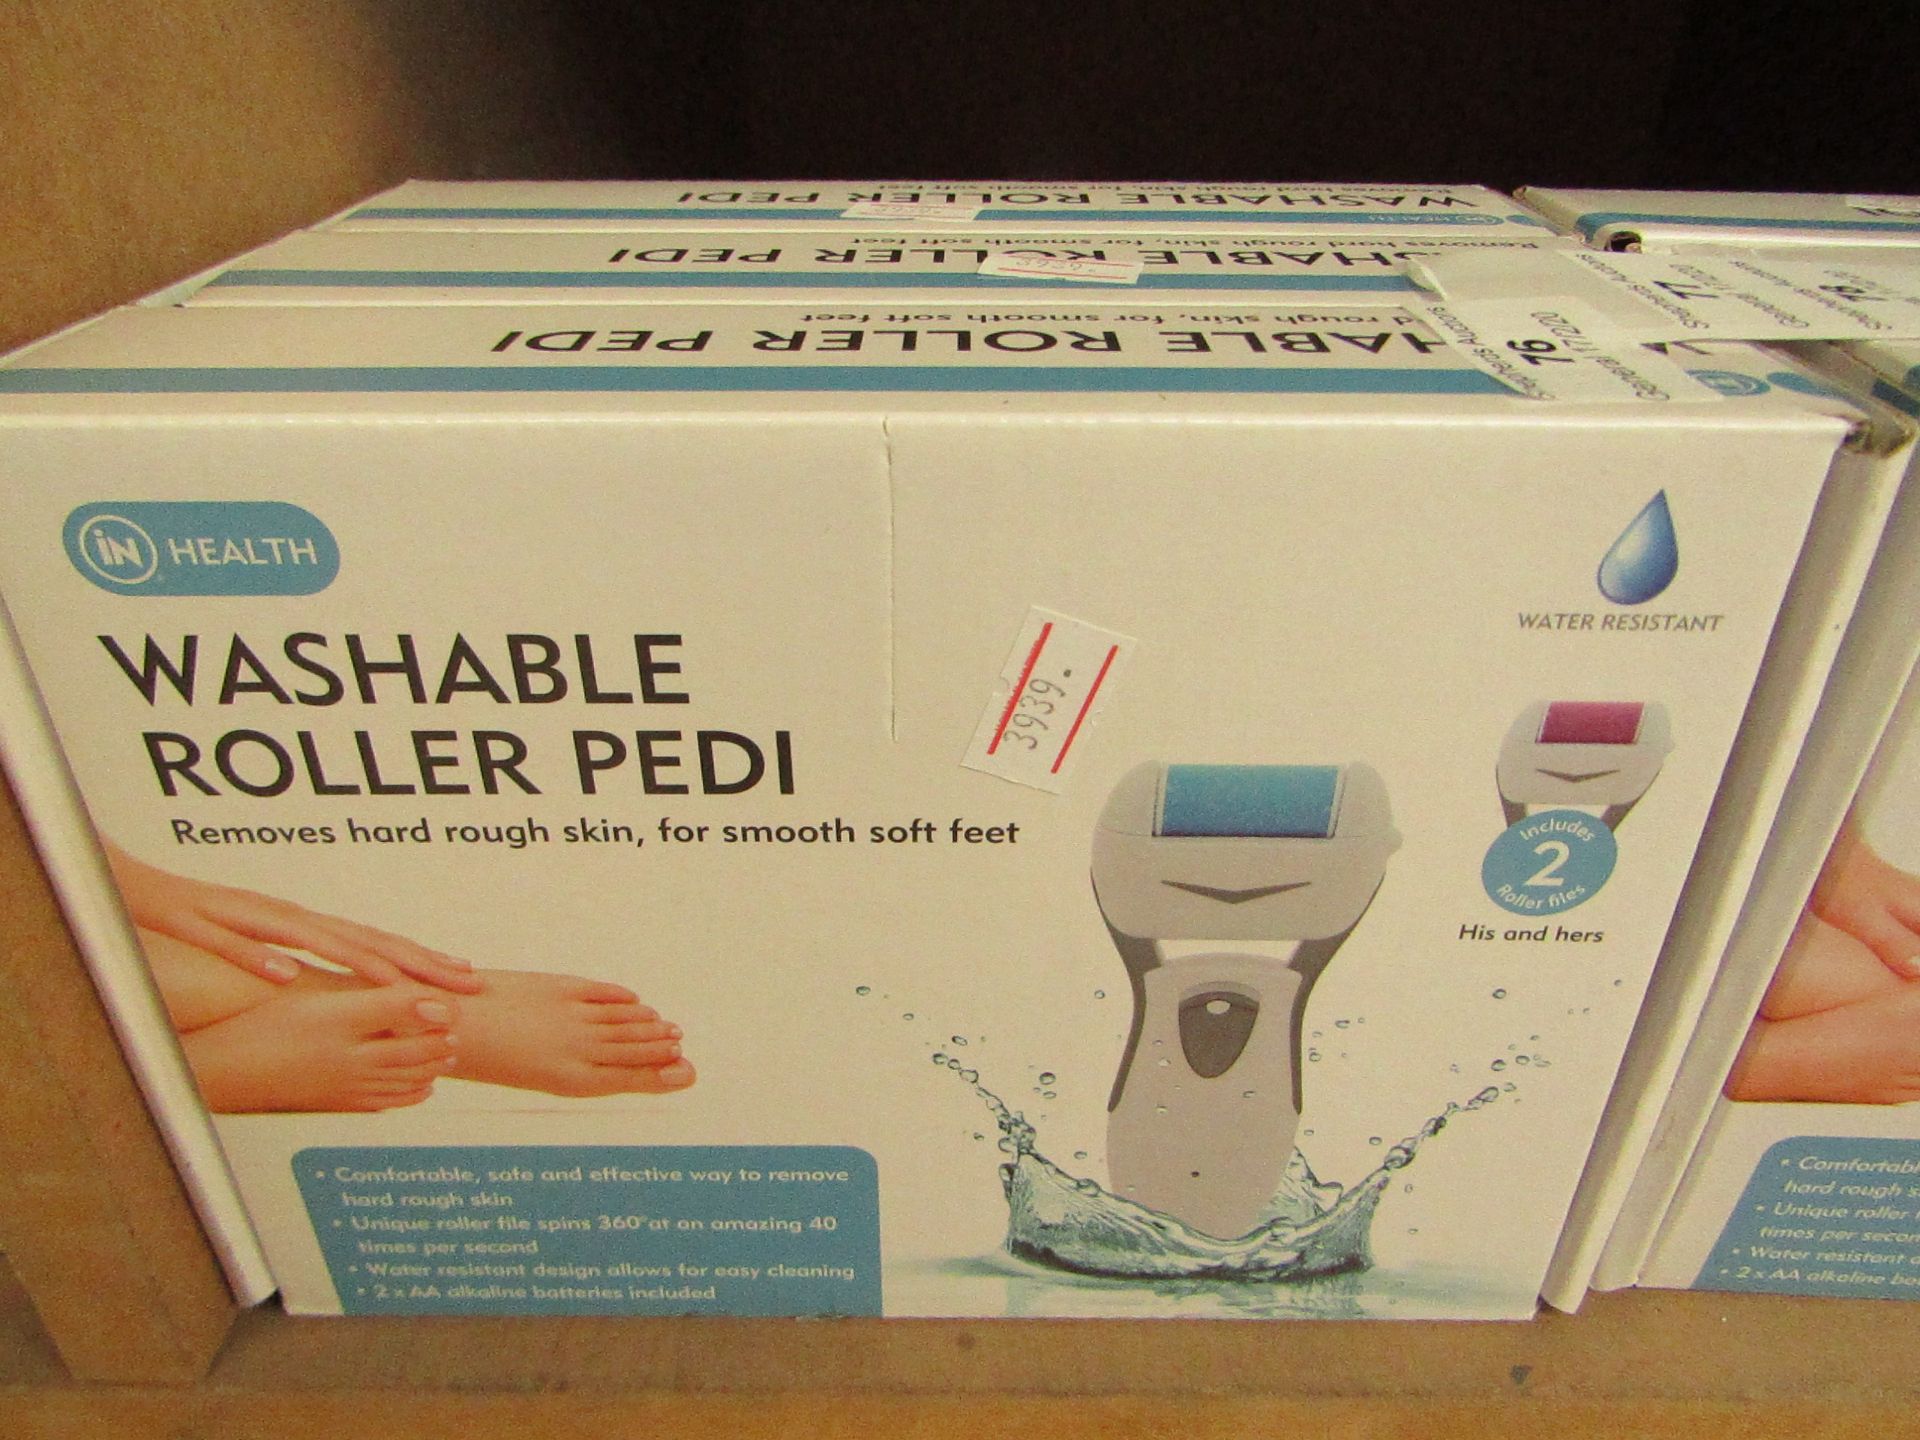 In Health Washable Roller Pedi, new and boxed.